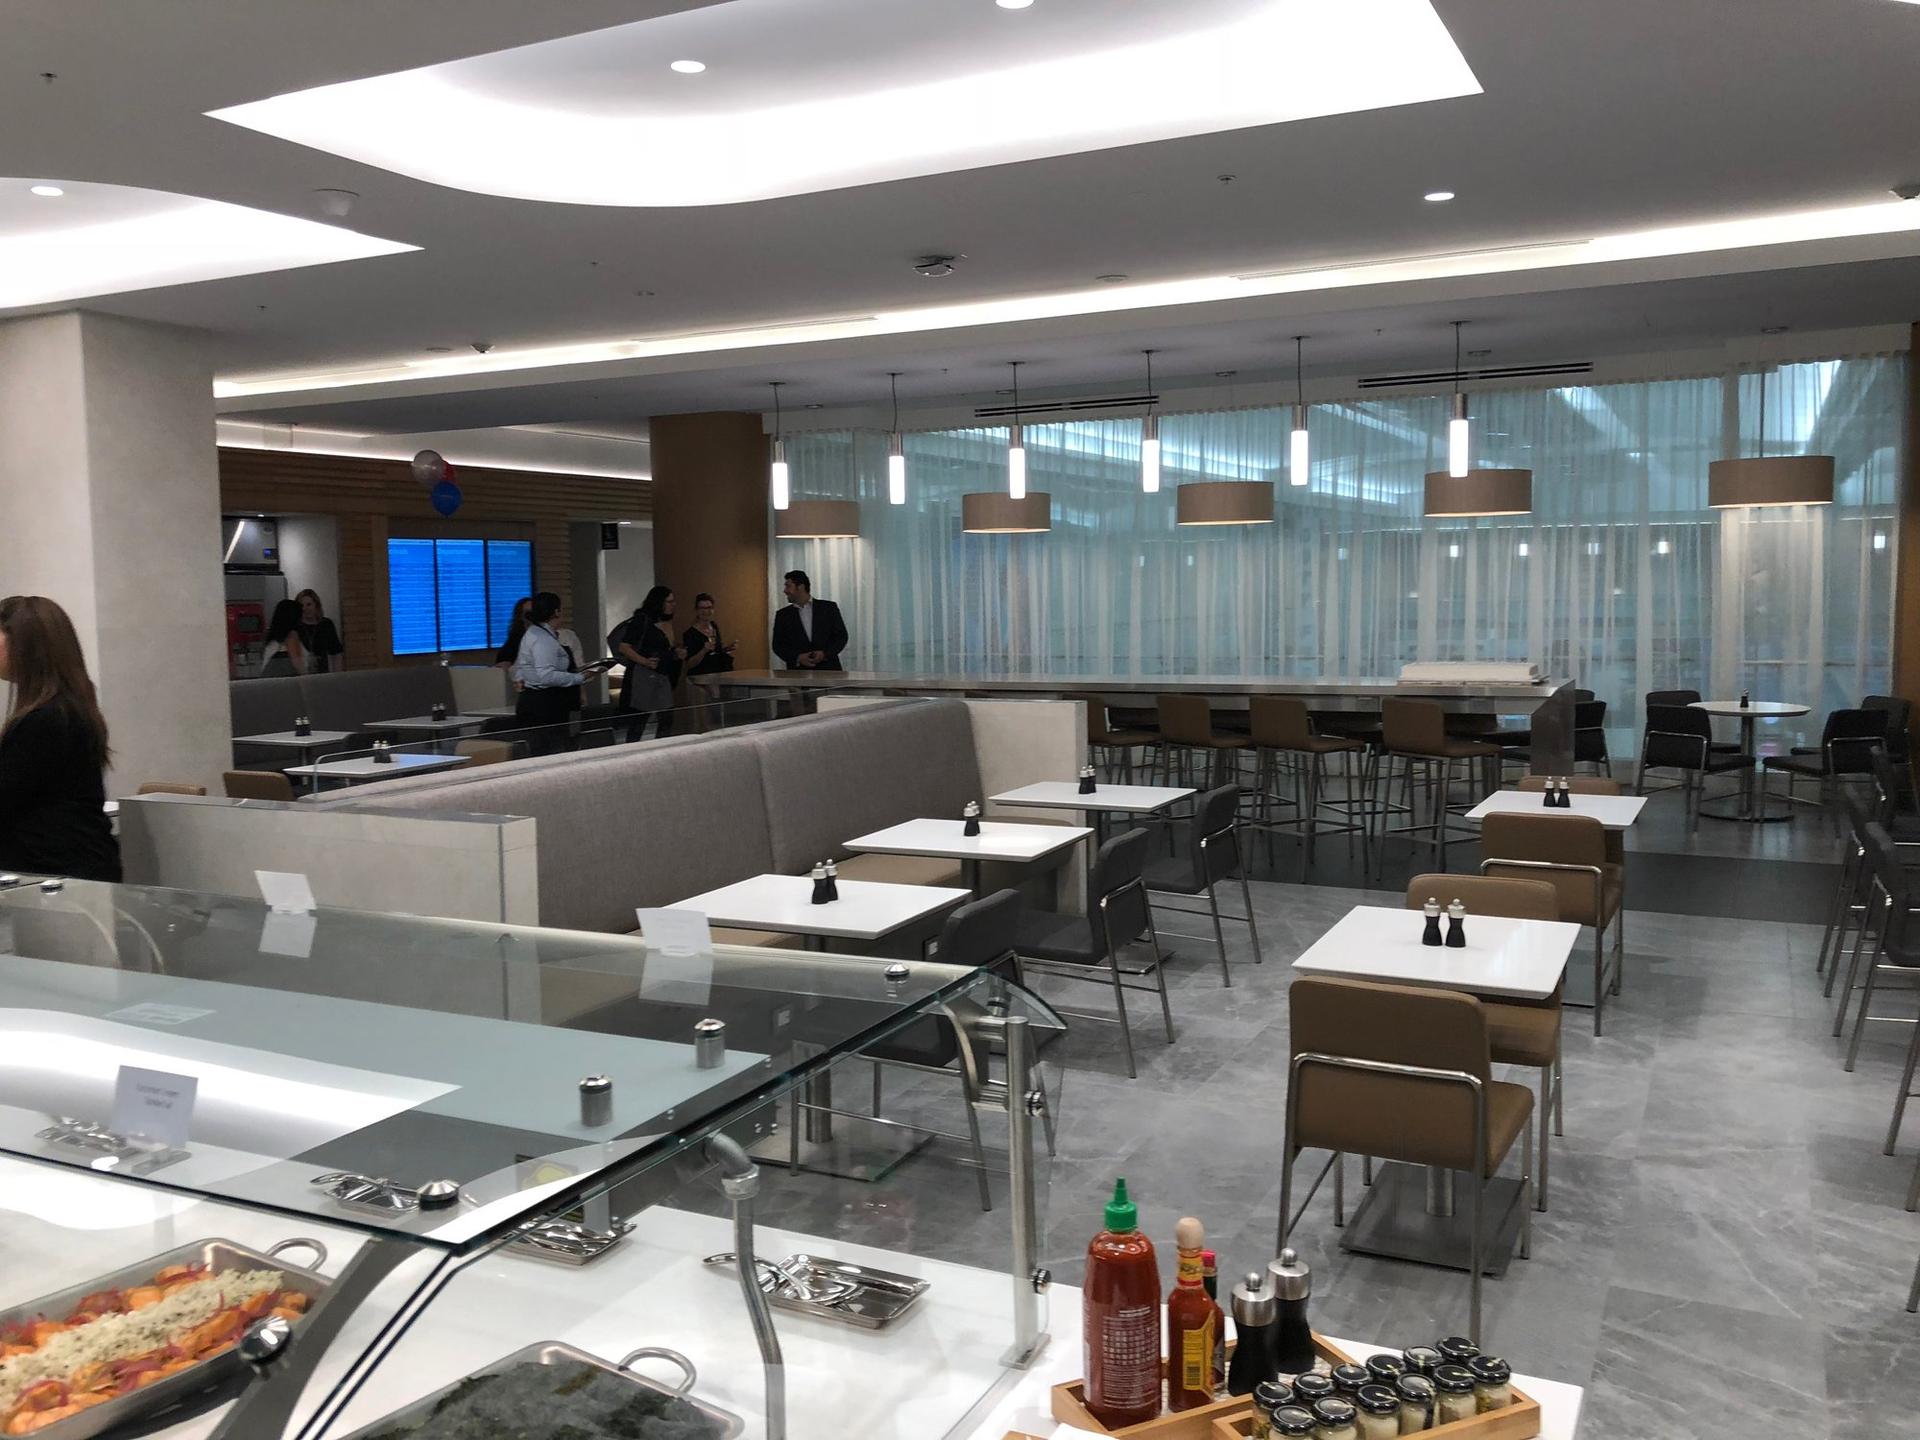 American Airlines Flagship Lounge image 4 of 65